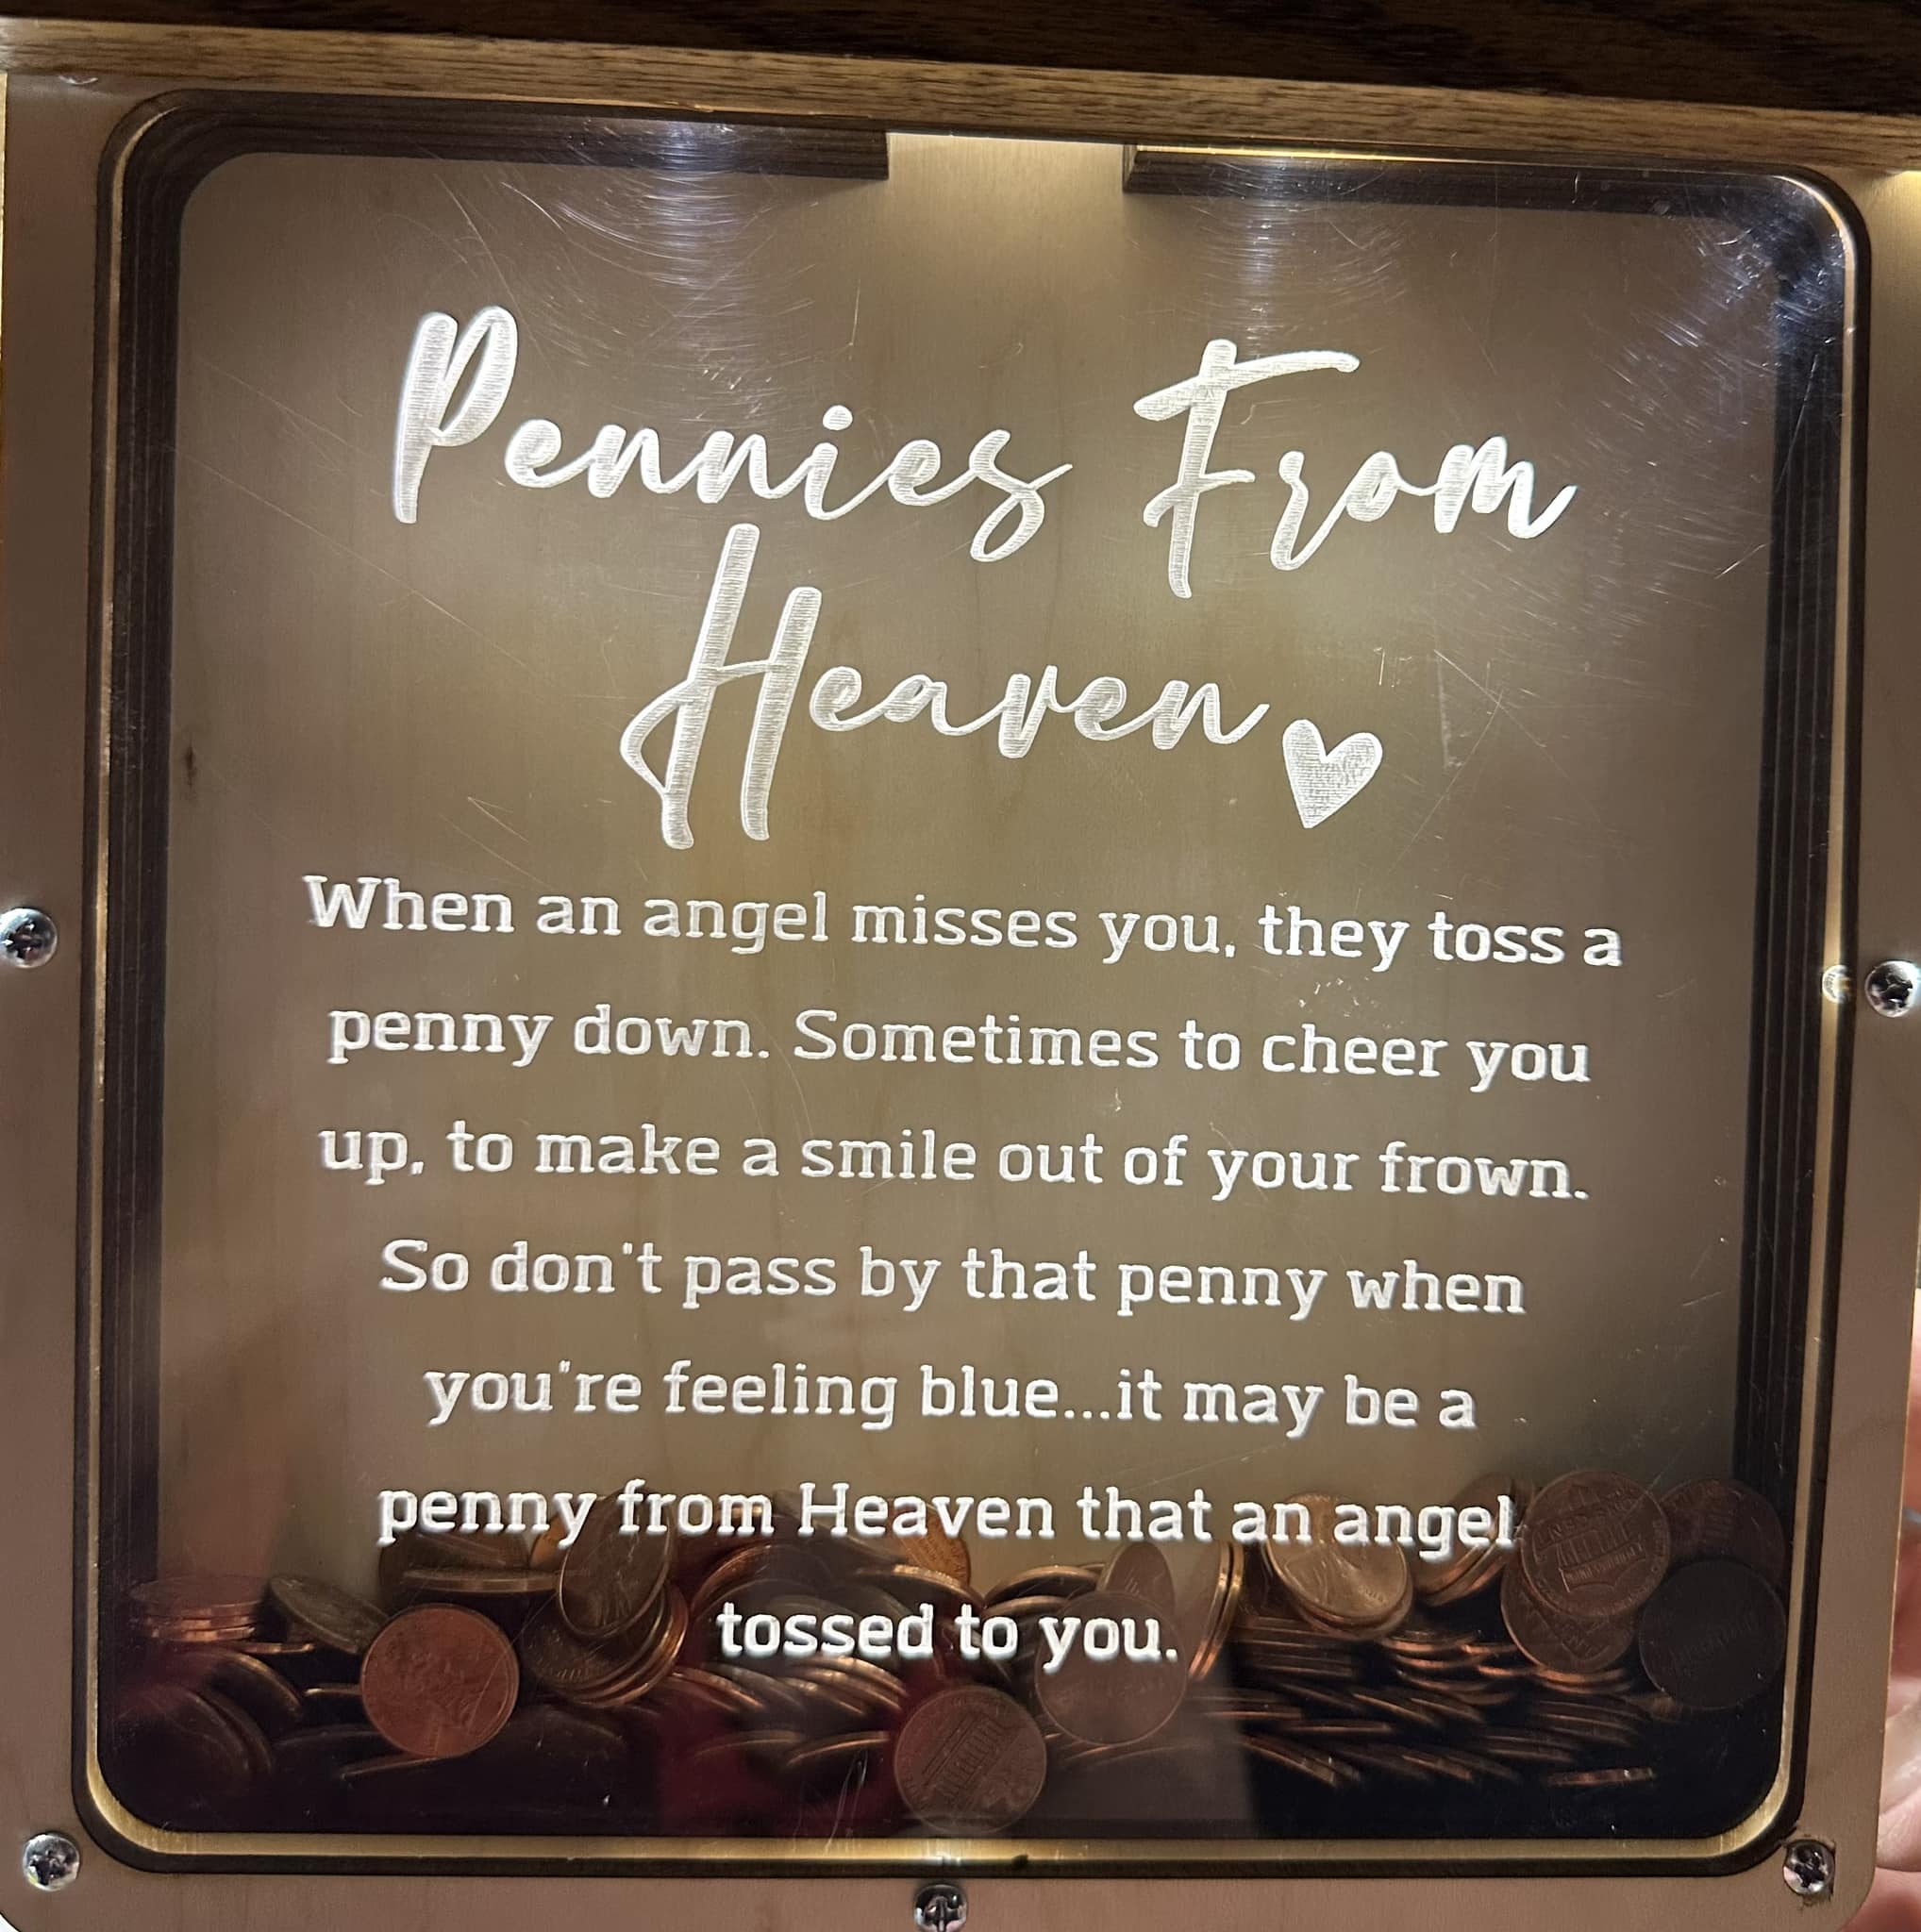 Pennies from Heaven Bank